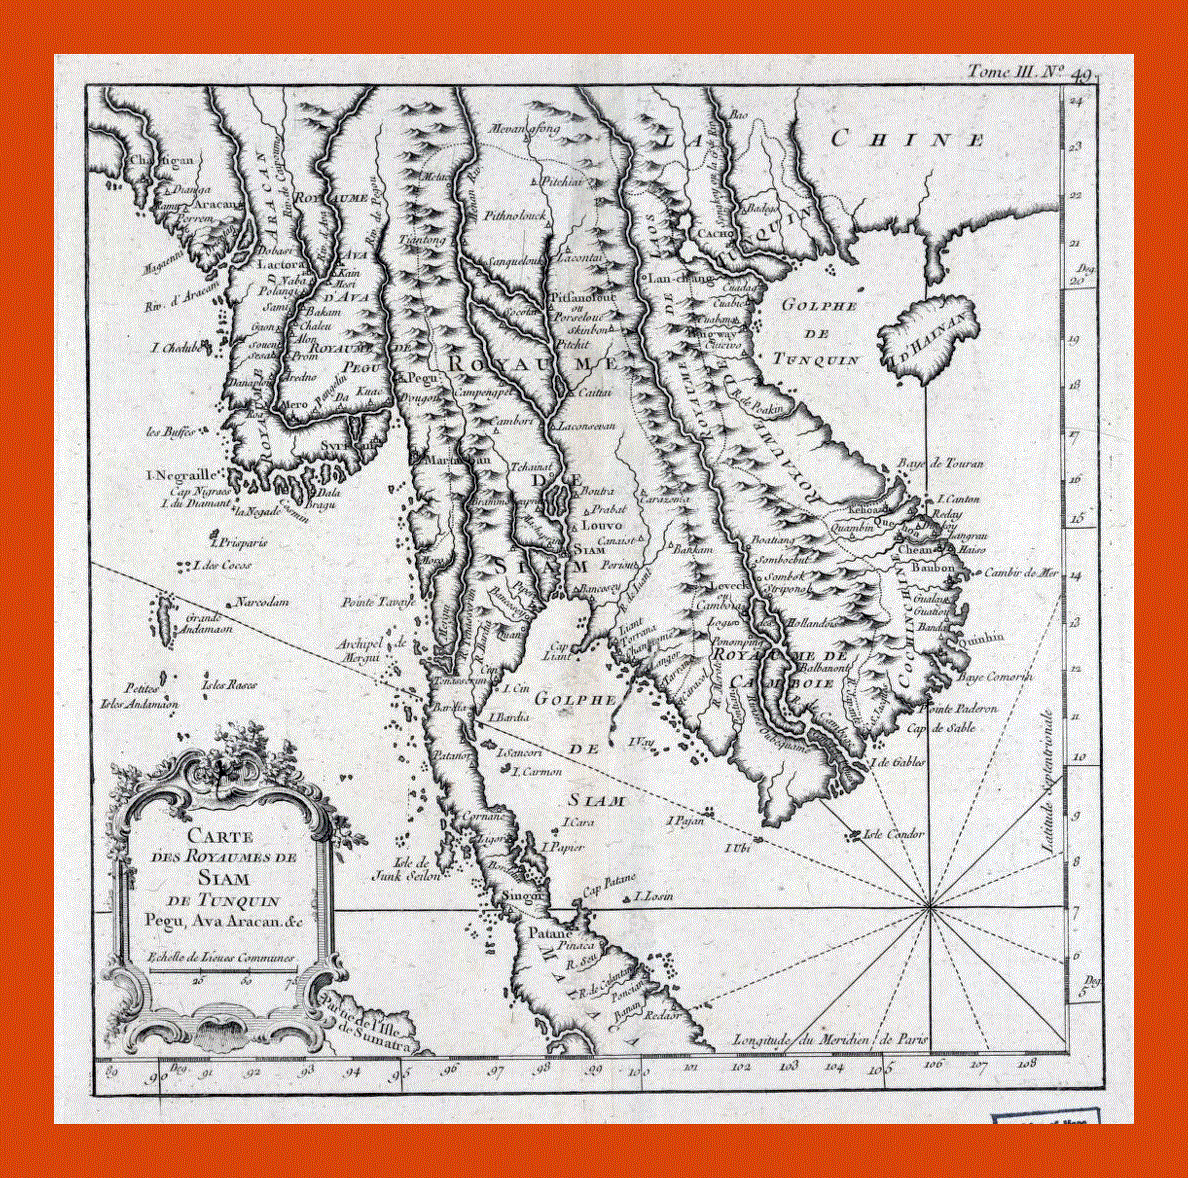 Old map of Indochina in french - 1764